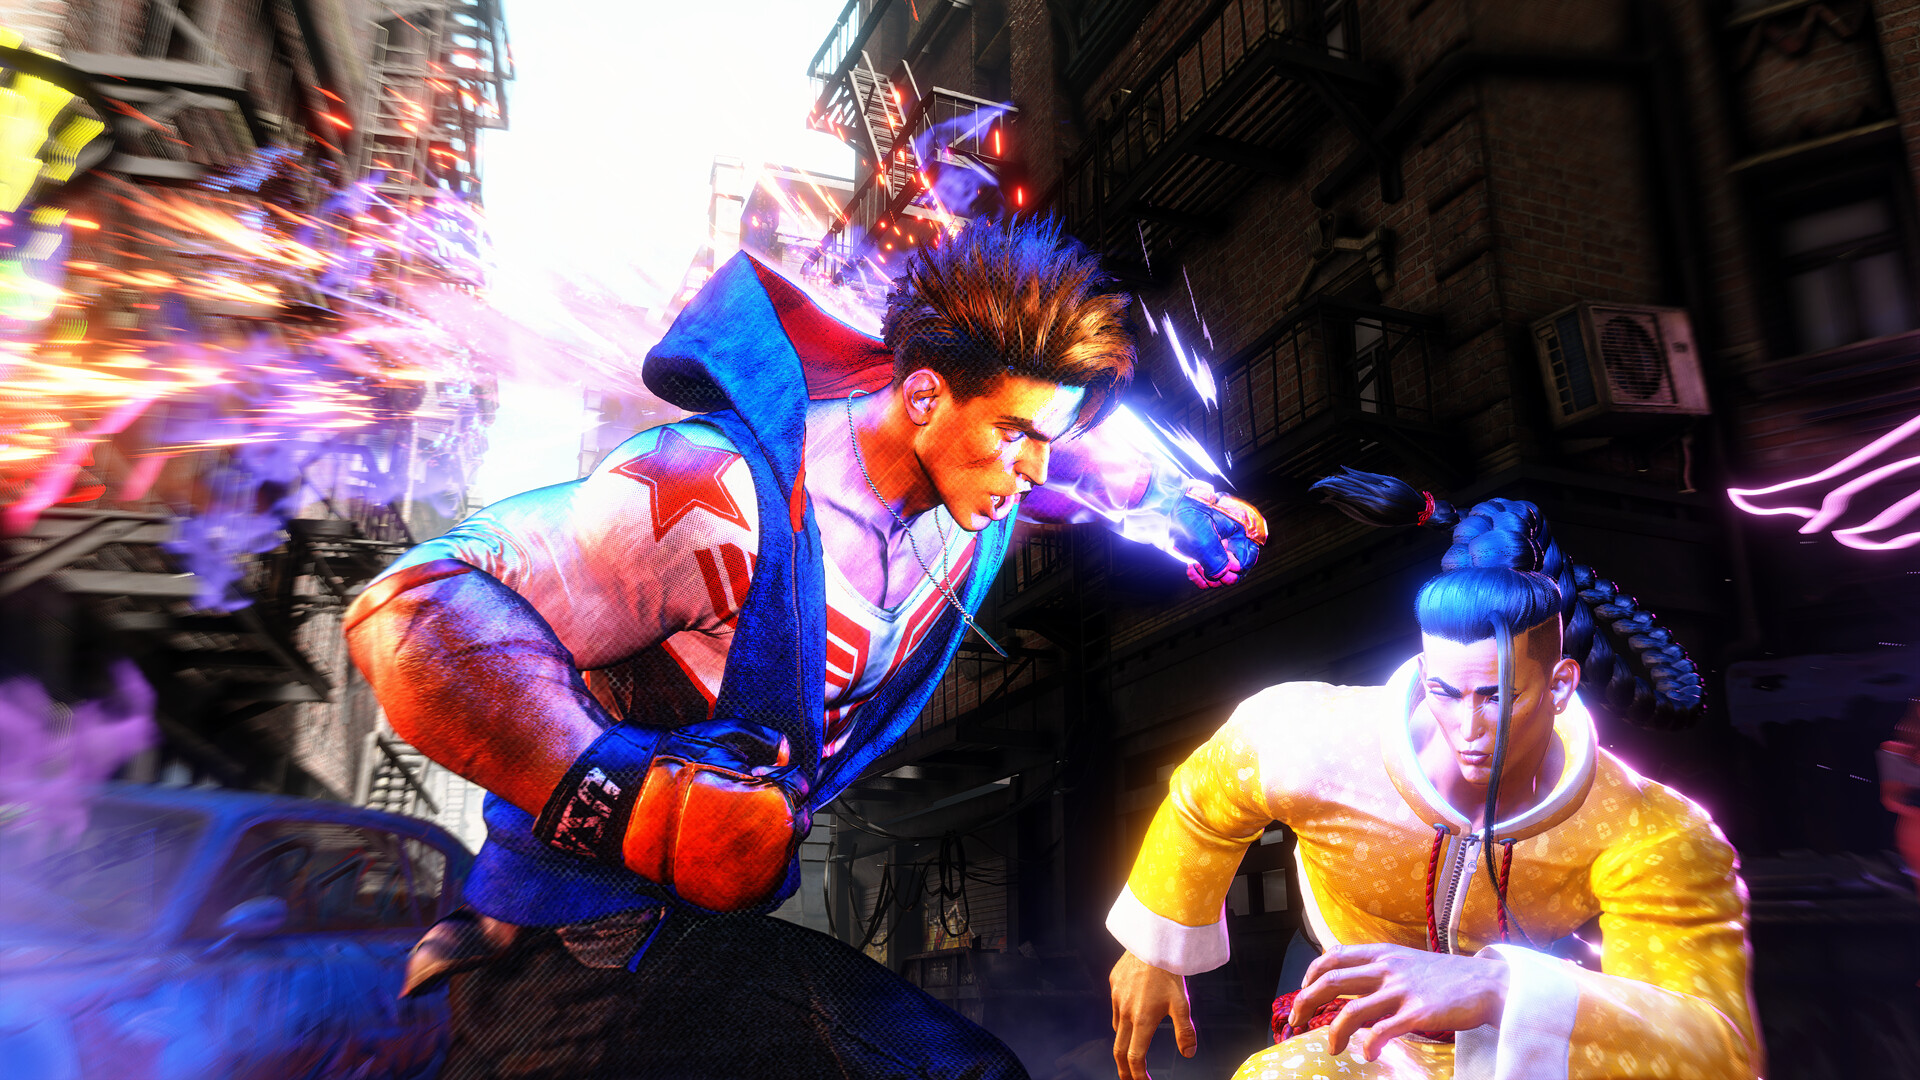 Street Fighter 6 is coming to Steam's biggest battle royale